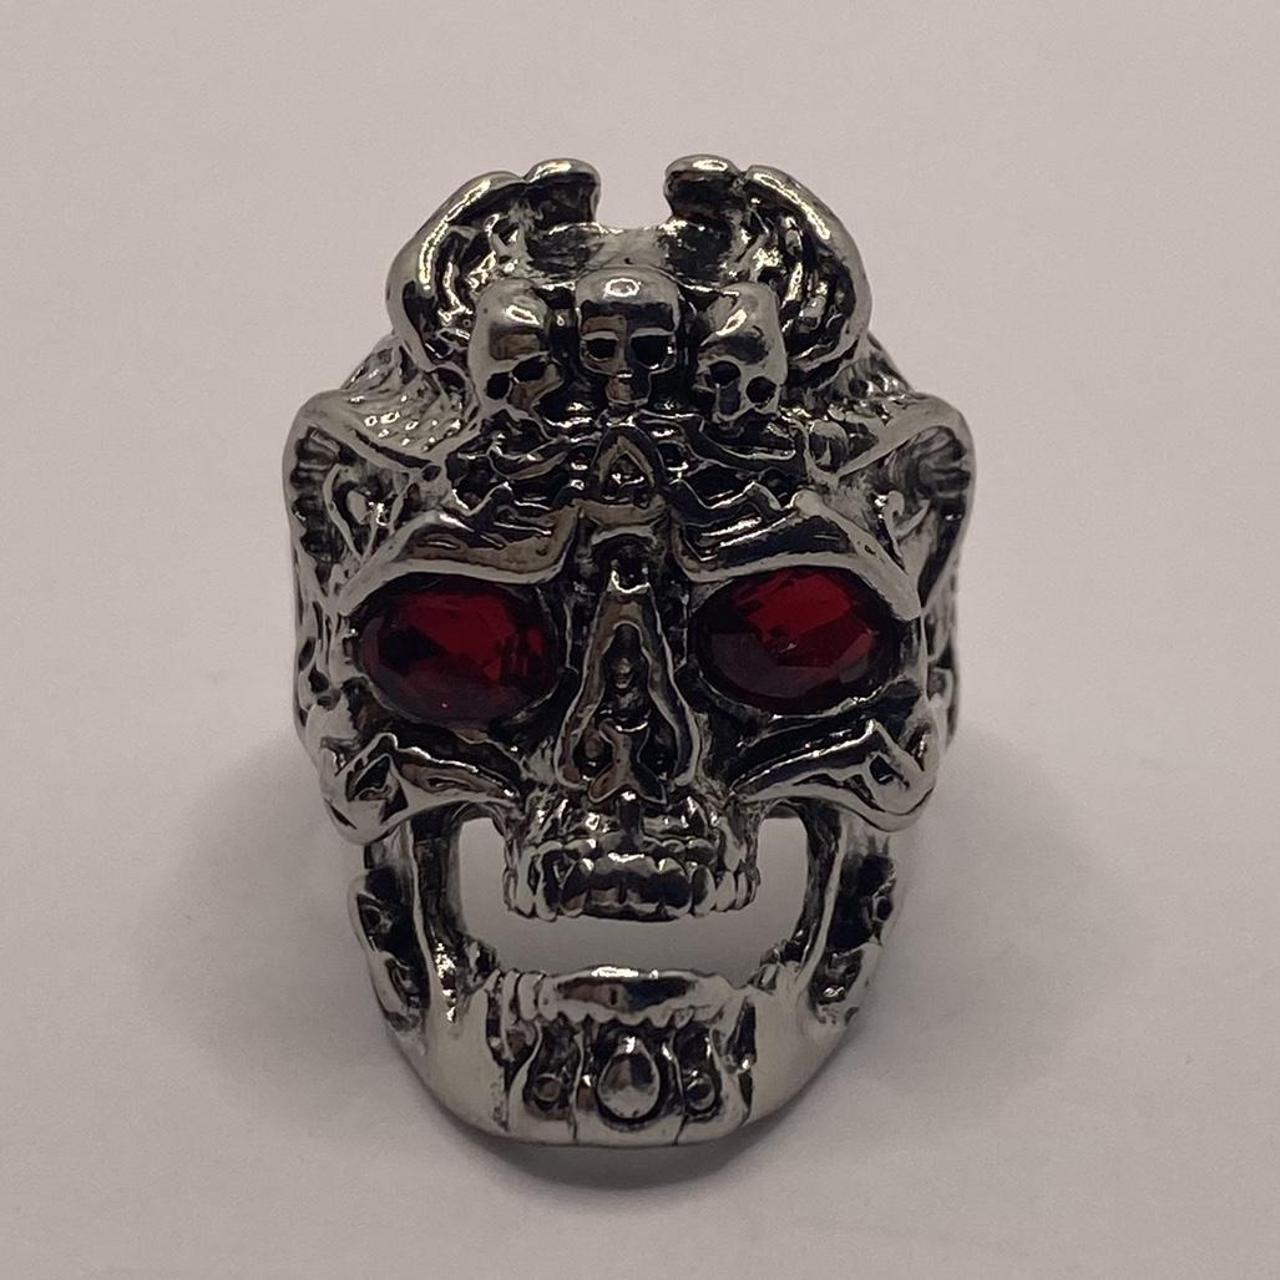 Product Image 1 - Cool red jewel eyed skull